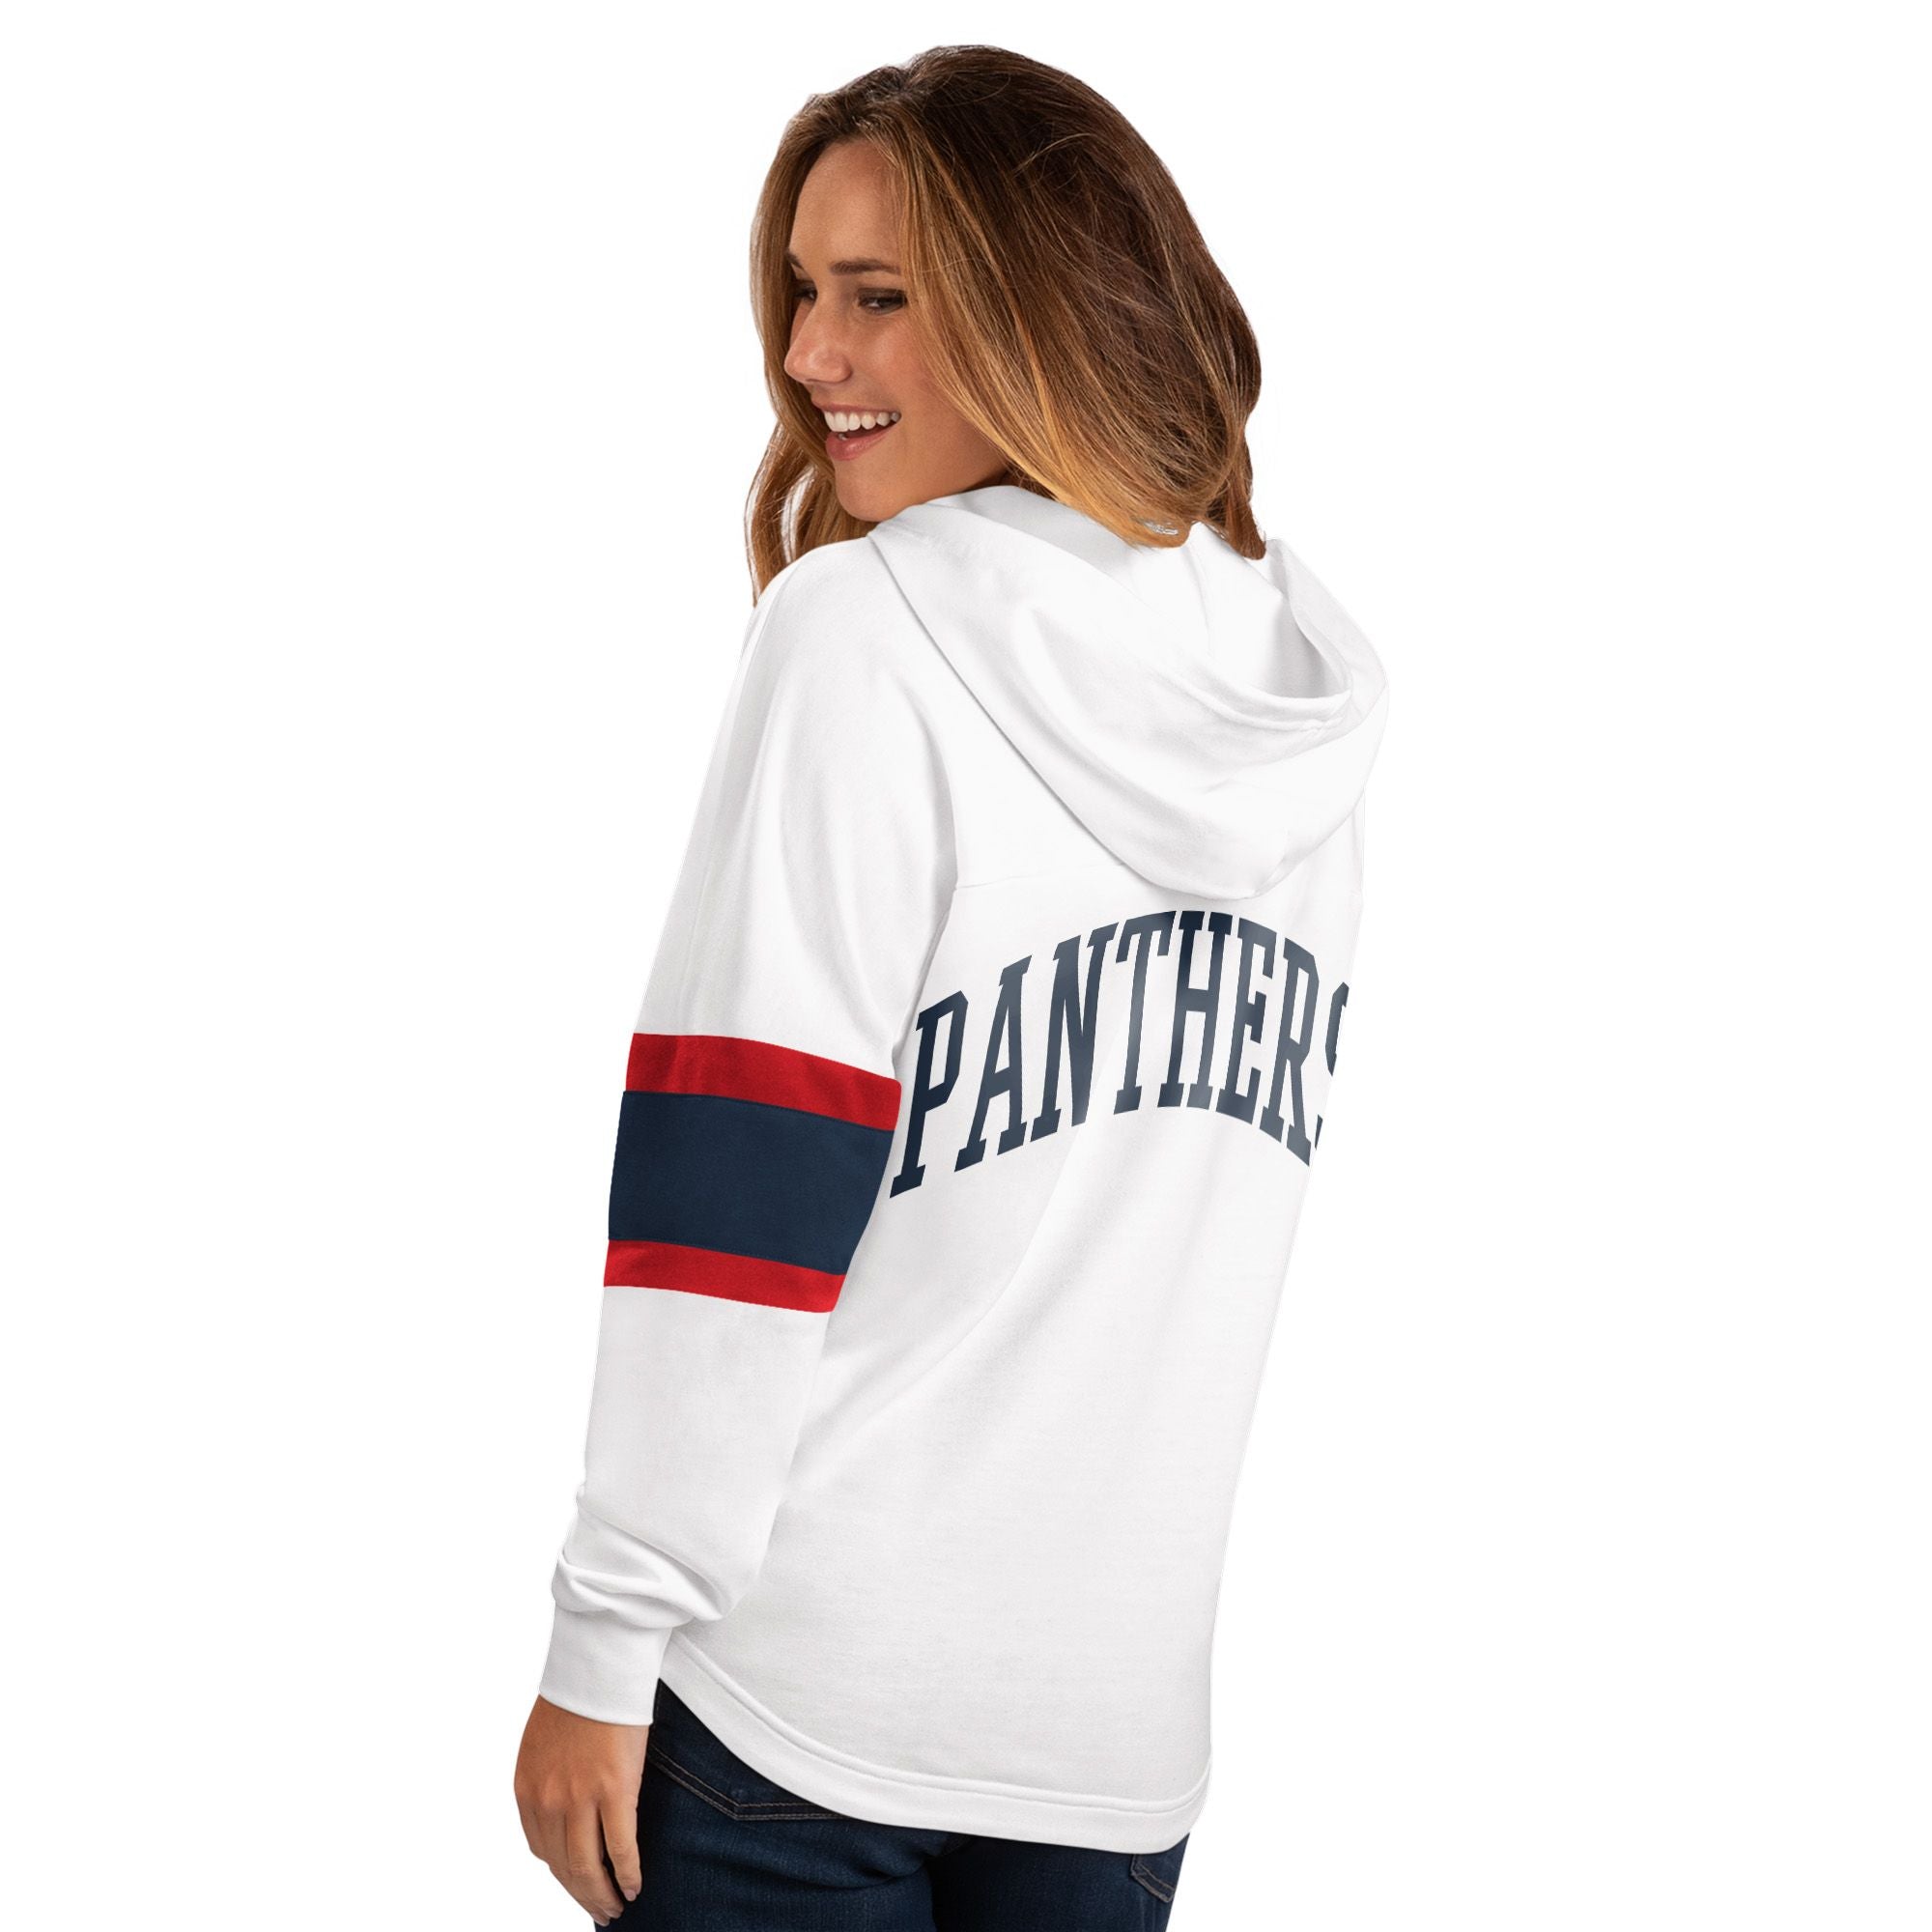 Florida Panthers Women's 4Her Laced Fleece Hooded Pullover - White